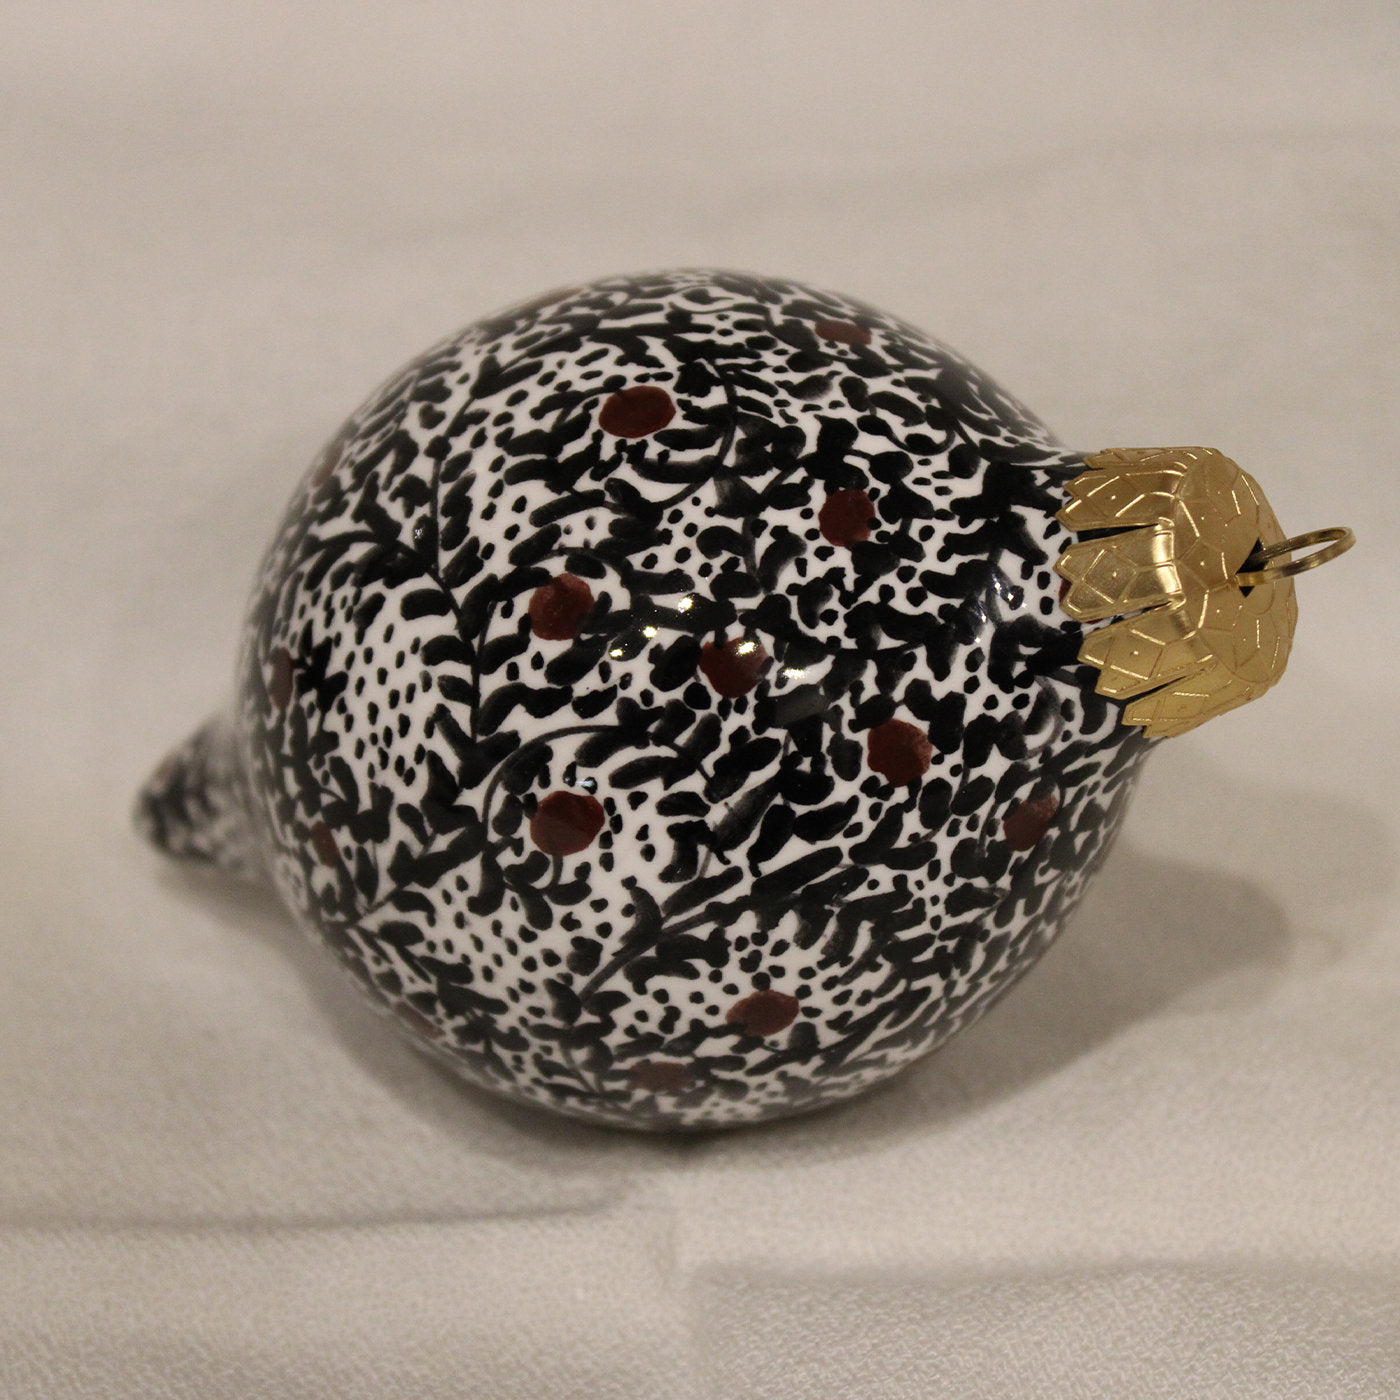 Black Dotted Floral Teardrop Christmas Ball Ornament  - Alternative view 2